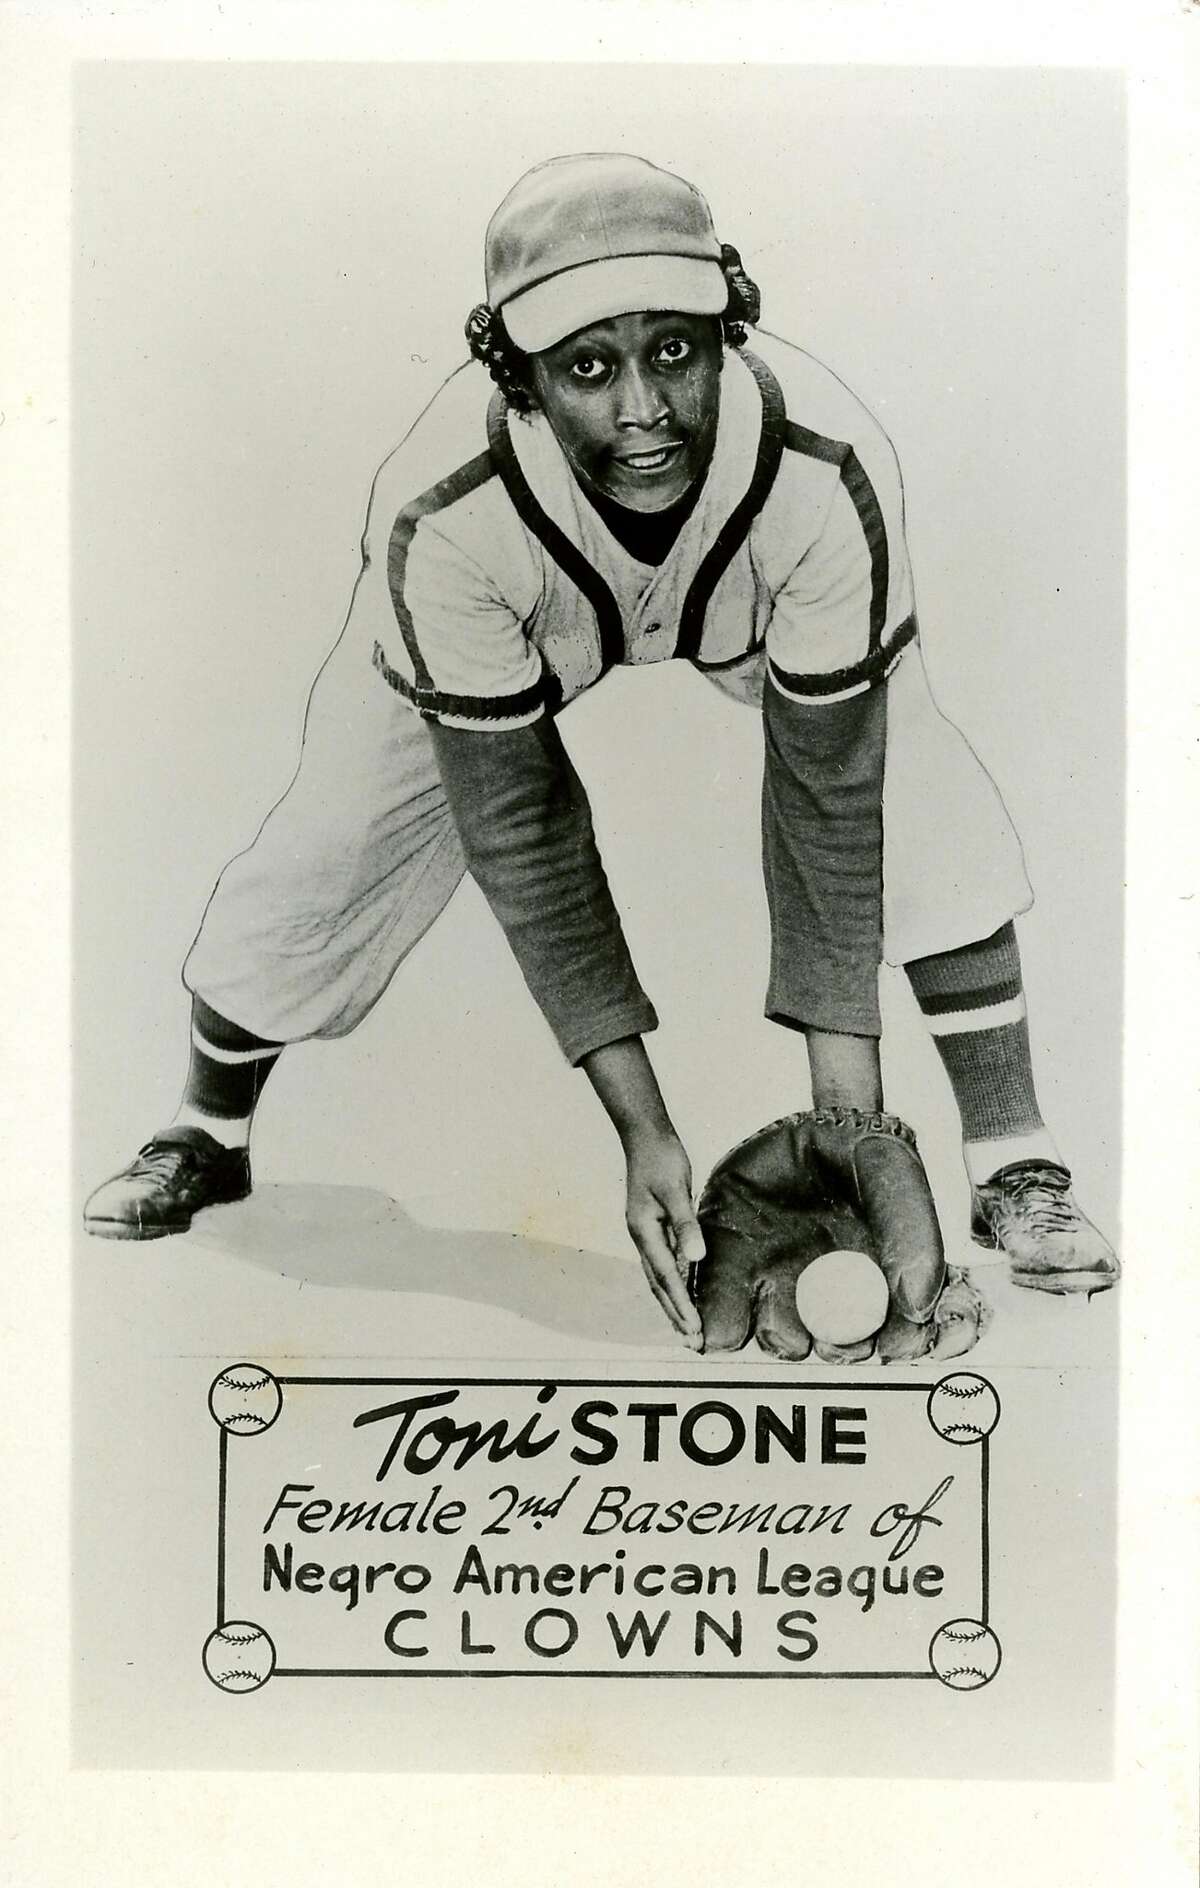 Toni Stone broke baseball gender barrier, and she's finally getting her due